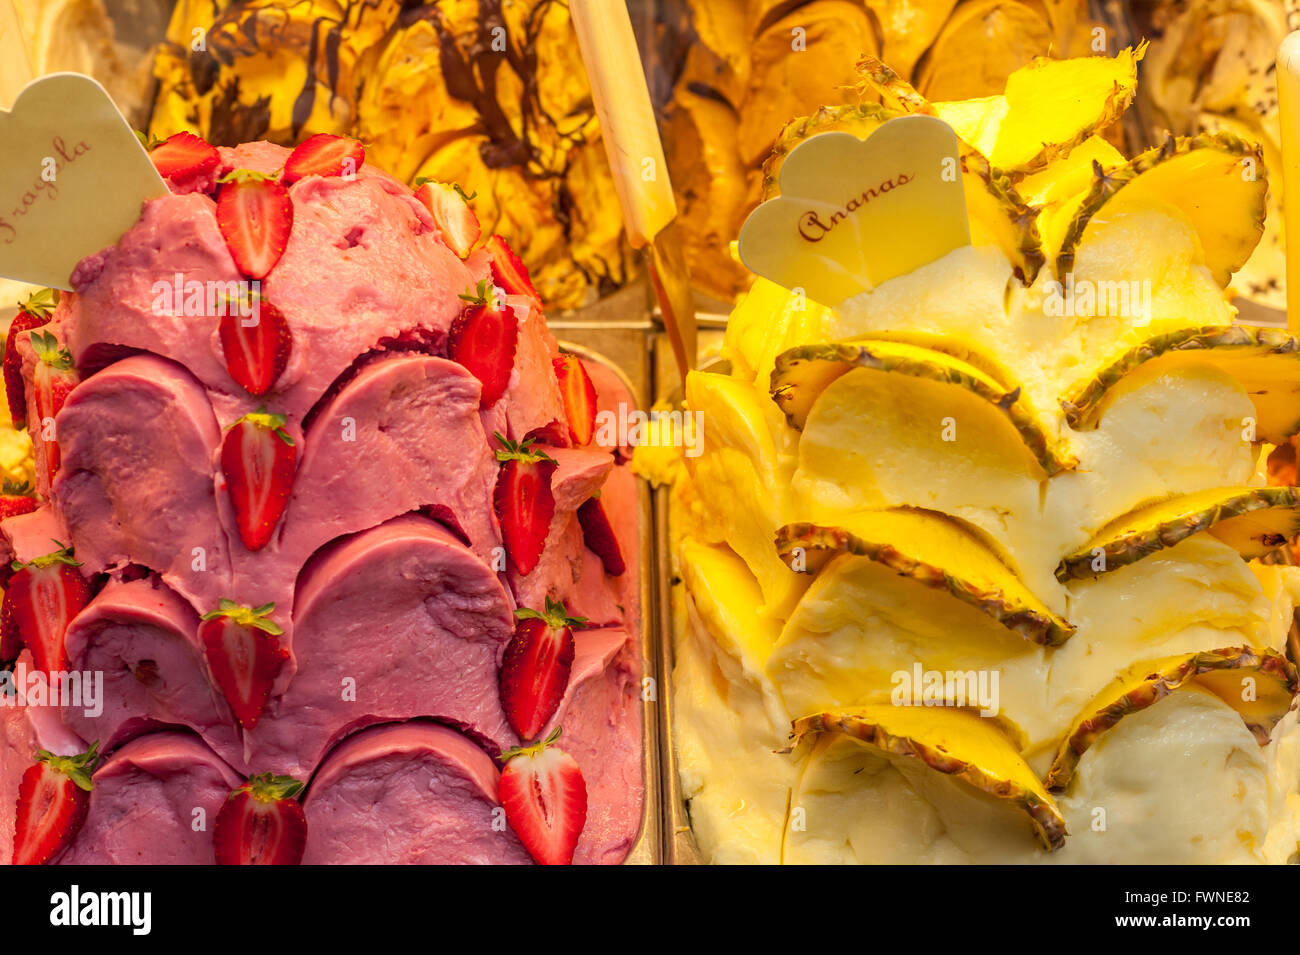 Ice cream on sale in the city of Florence. Stock Photo